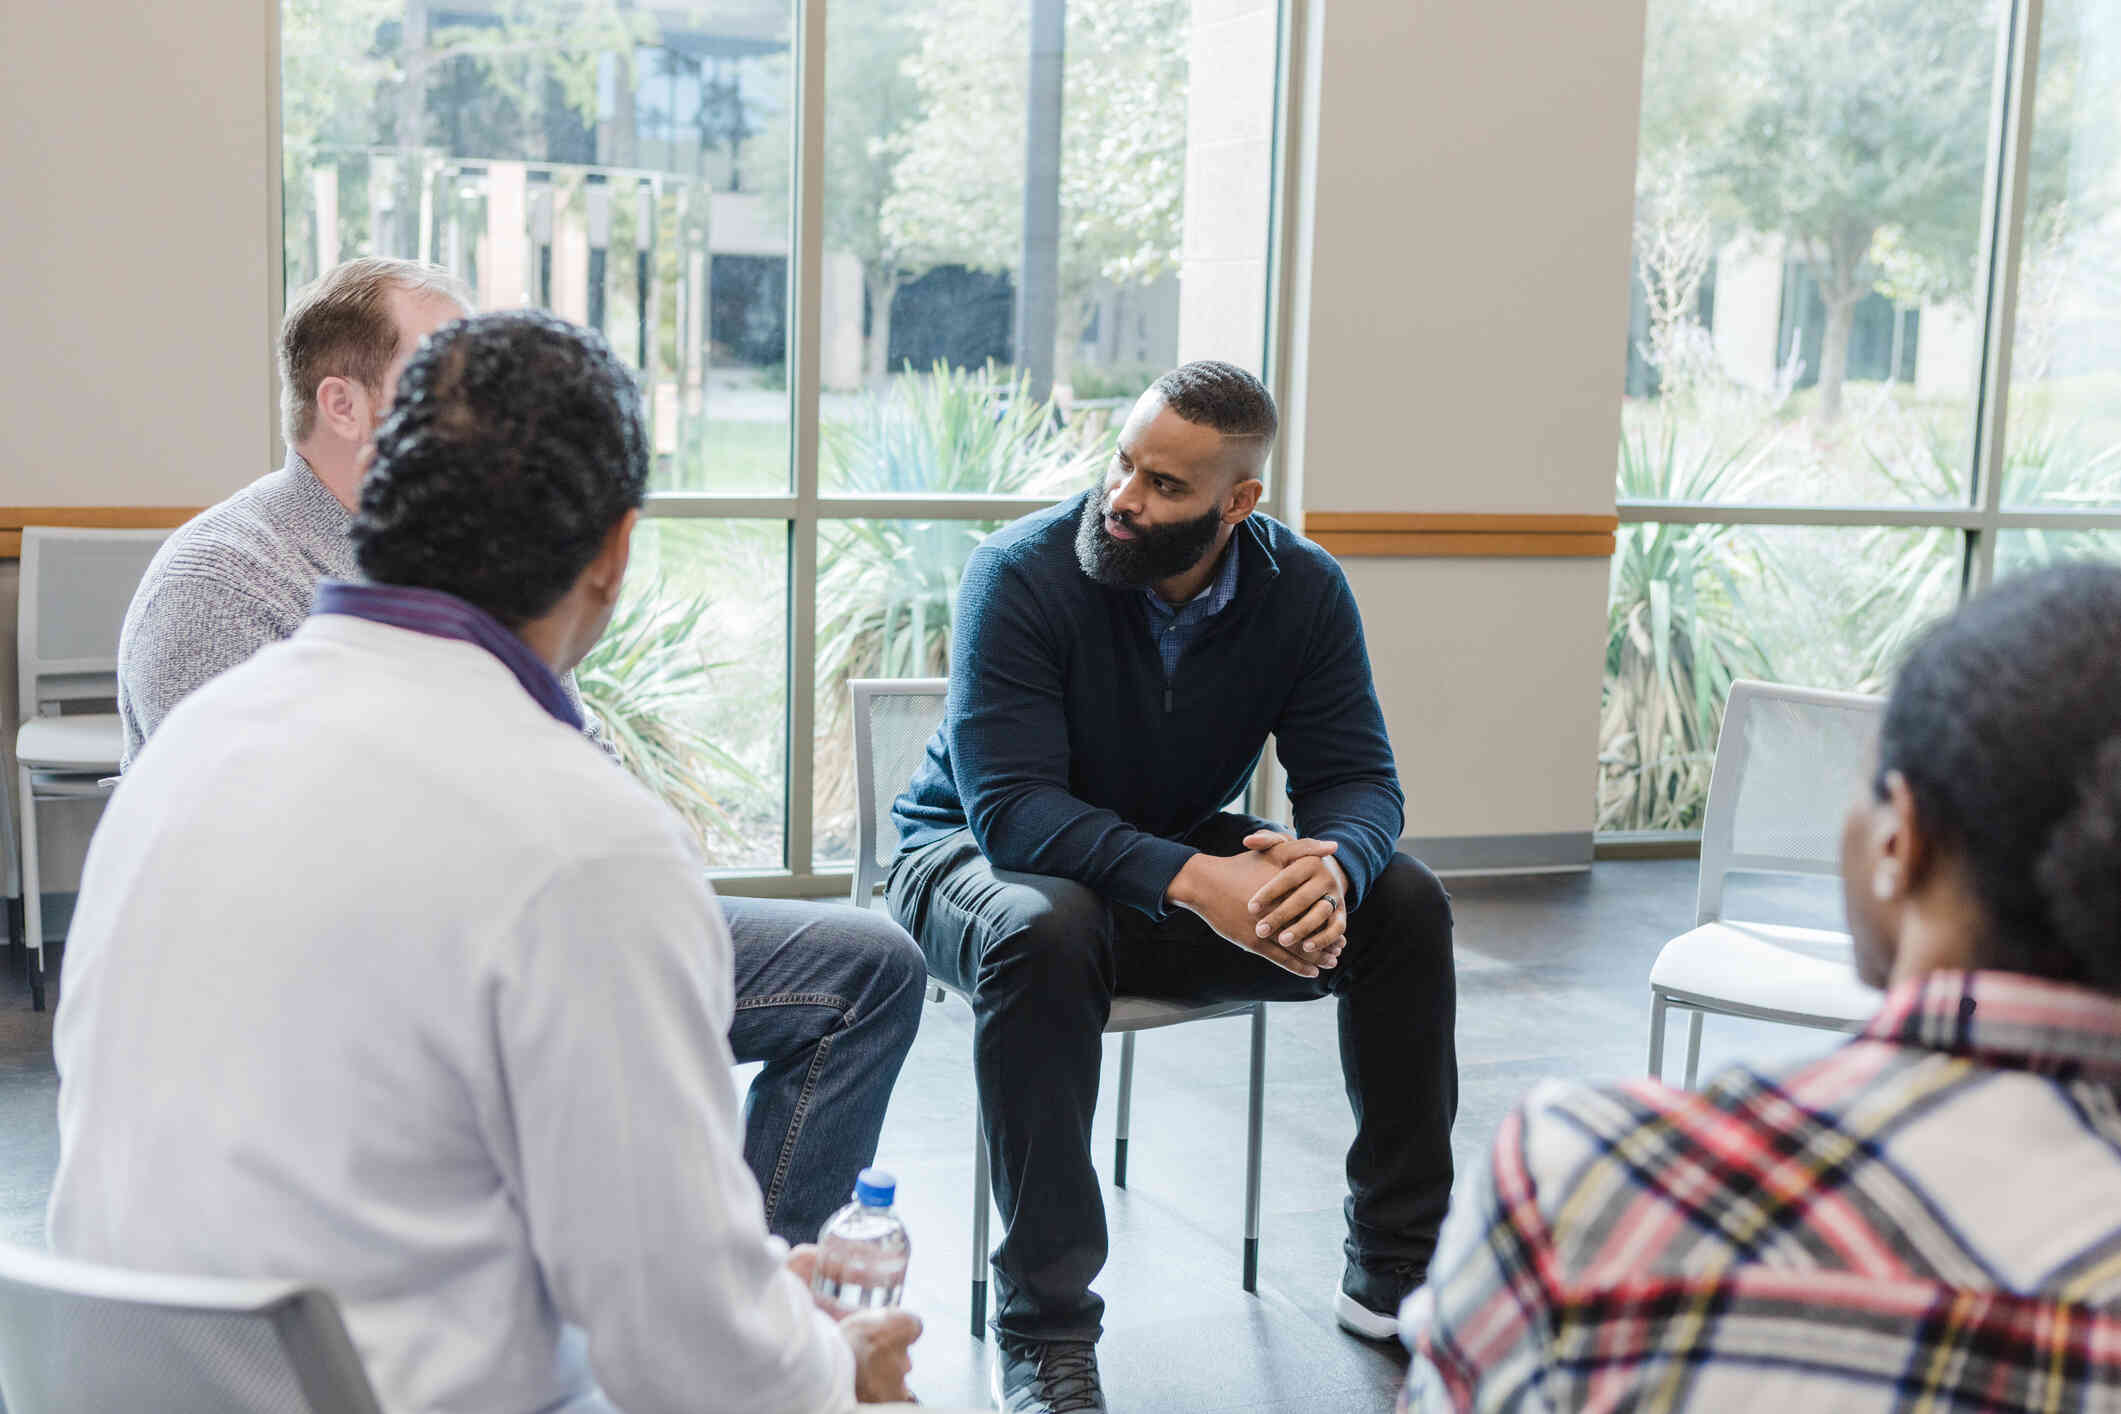 A group of men sit in chairs in a cirlce and talk with serious expressions during a group therapy session.